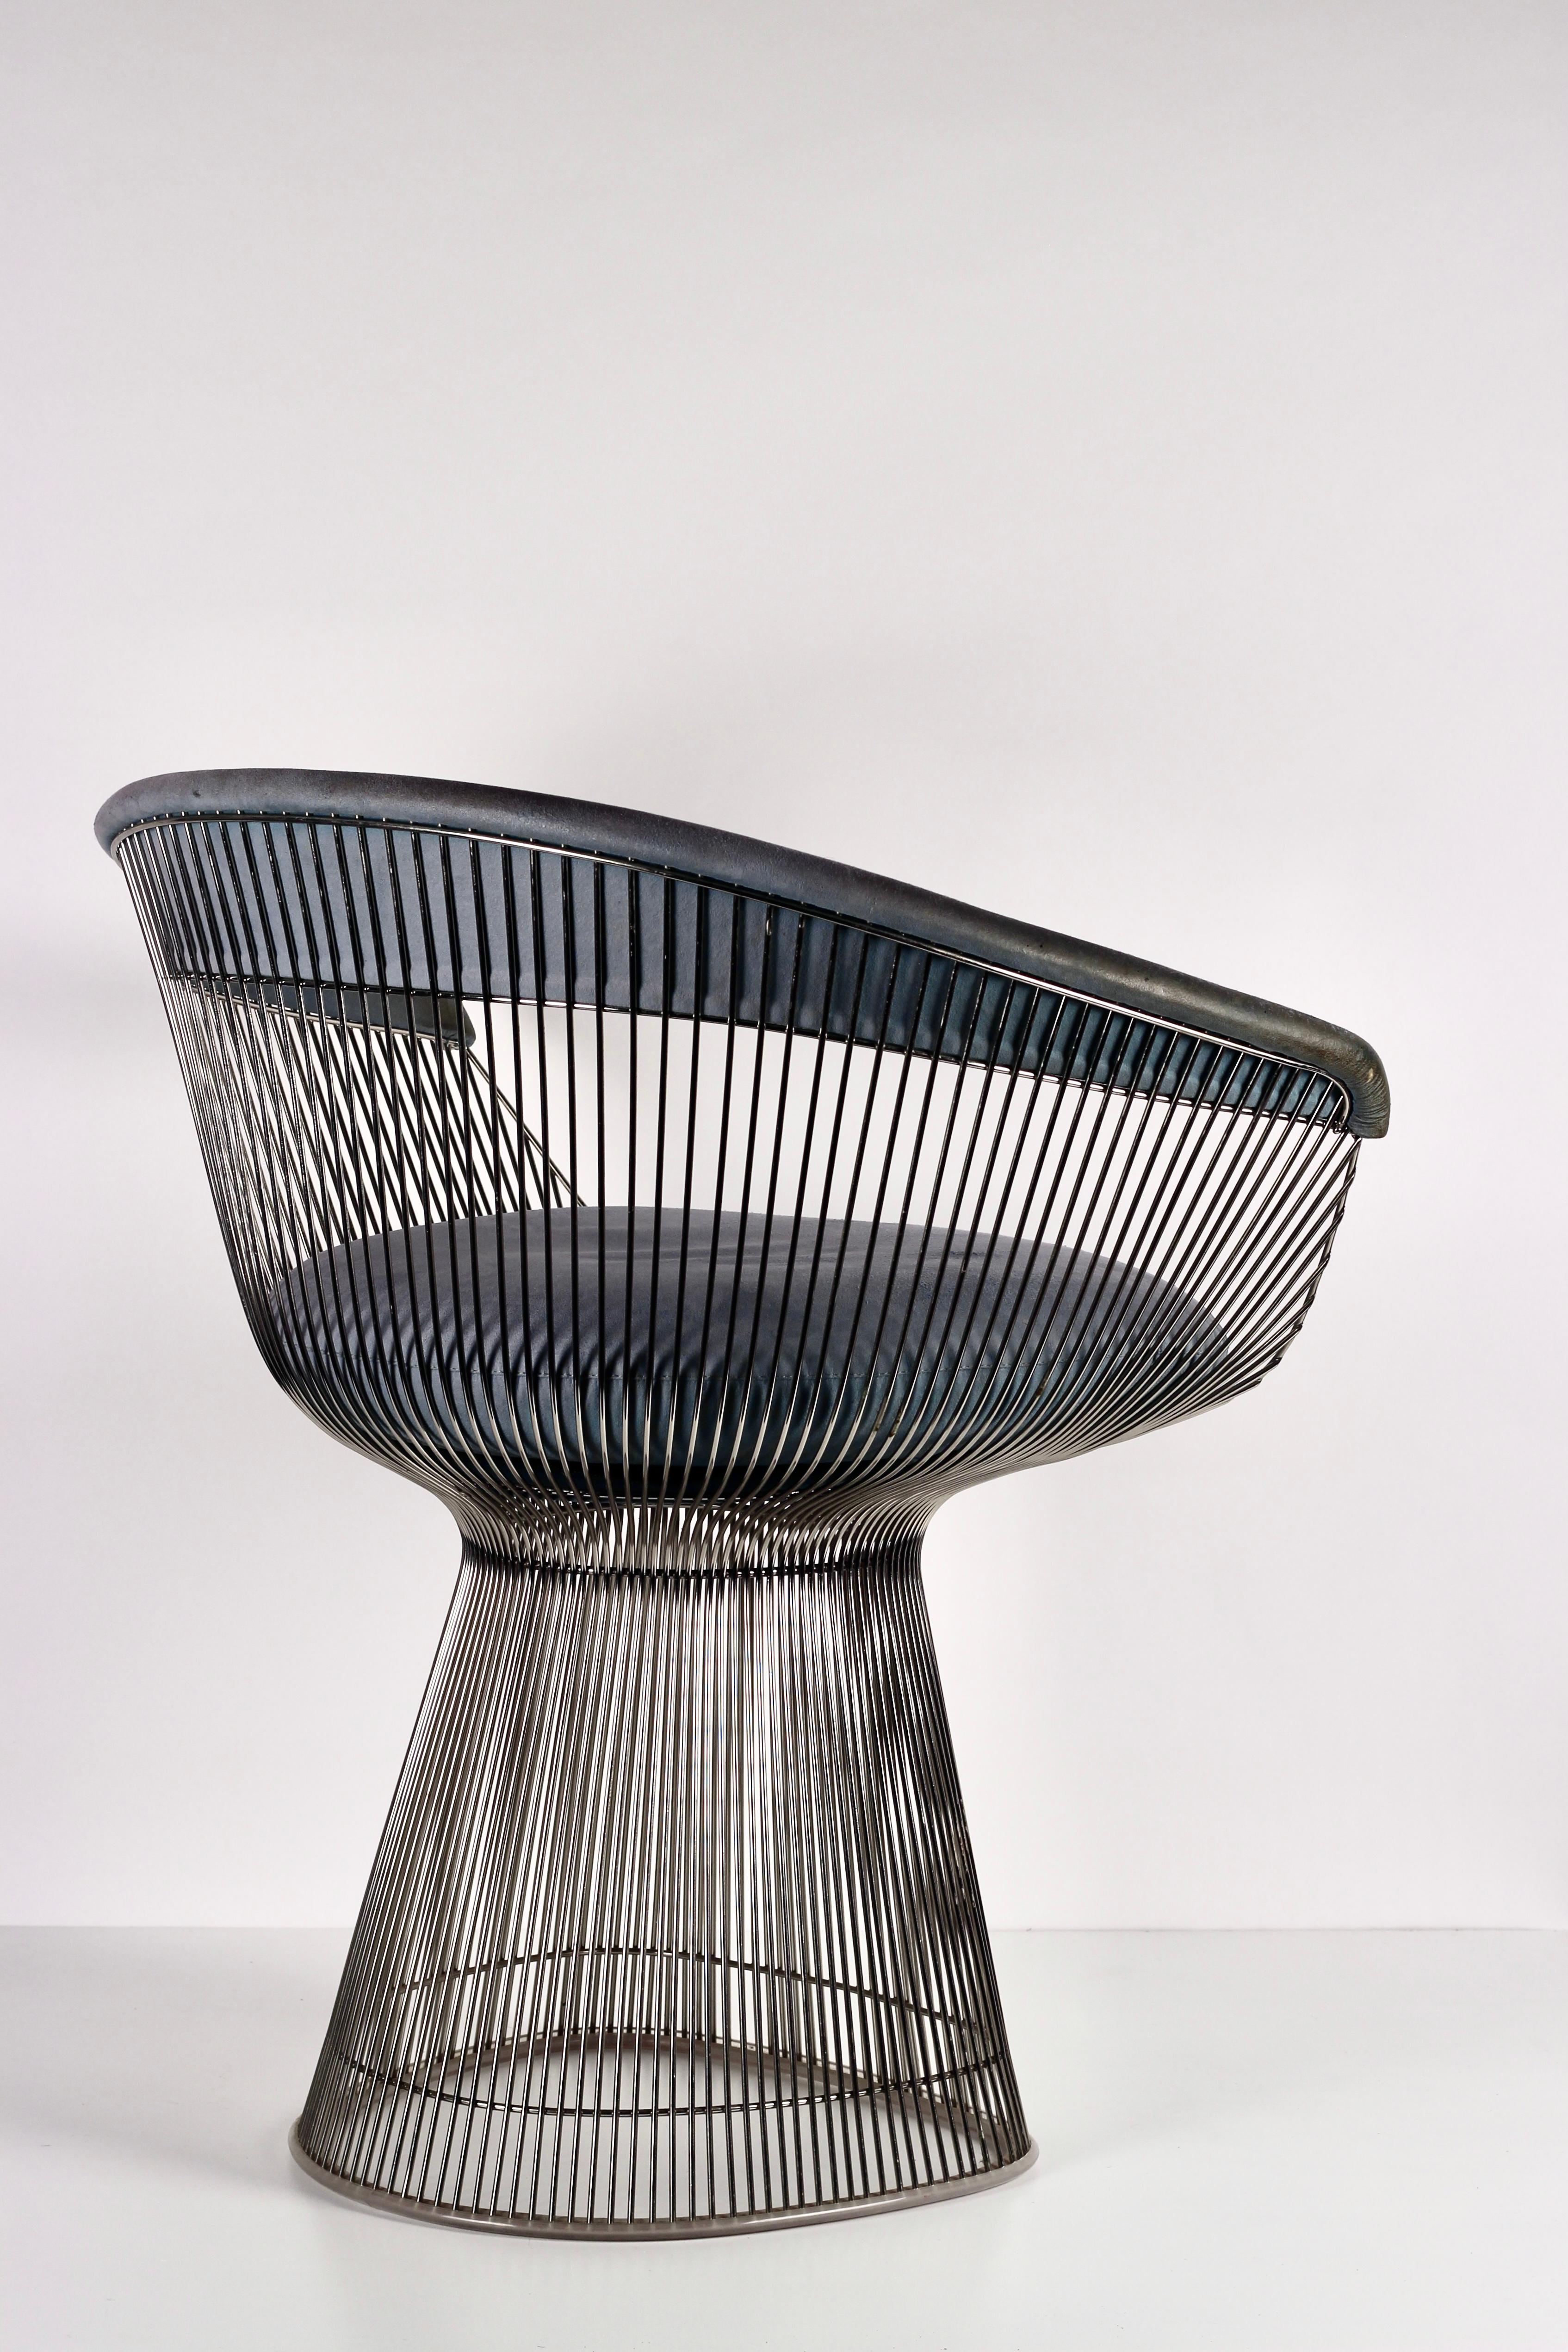 Warren Platner studied at Cornell University, graduating in 1941 with a degree in architecture. He went on to work with legendary architects Raymond Loewy, Eero Saarinen, and I. M. Pei before opening his own architecture practice. Platner made